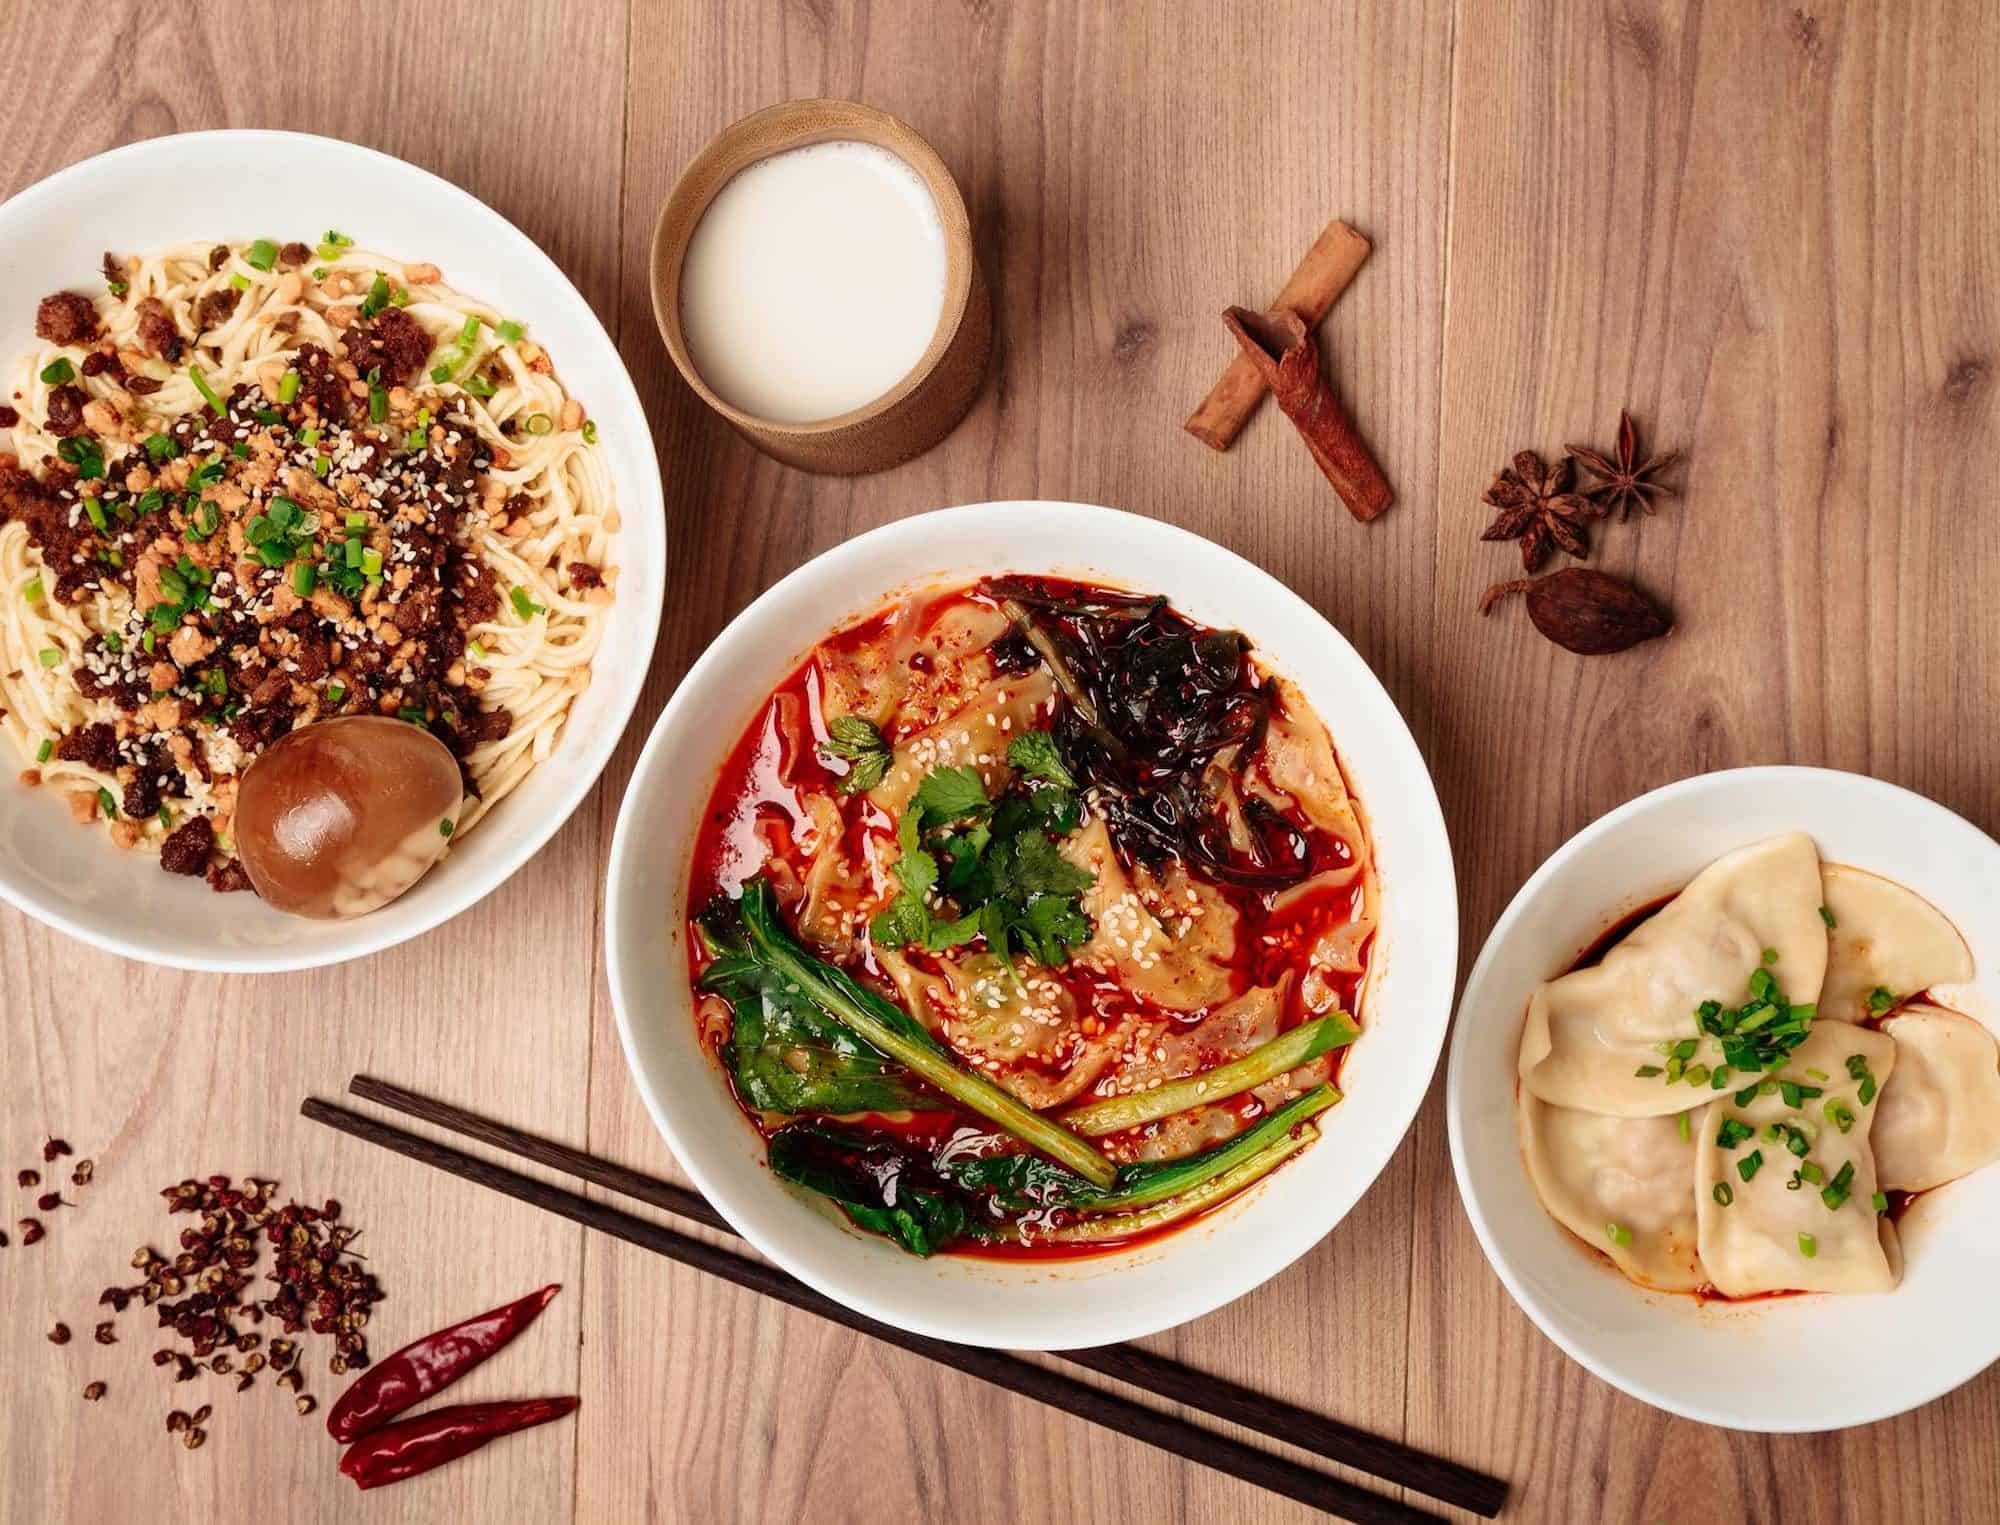 One of the best restaurants for authentic Chinese food in Paris' South Pigalle is L'Atelier Mala, and we love their generously served noodle soup bowls and raviolis.